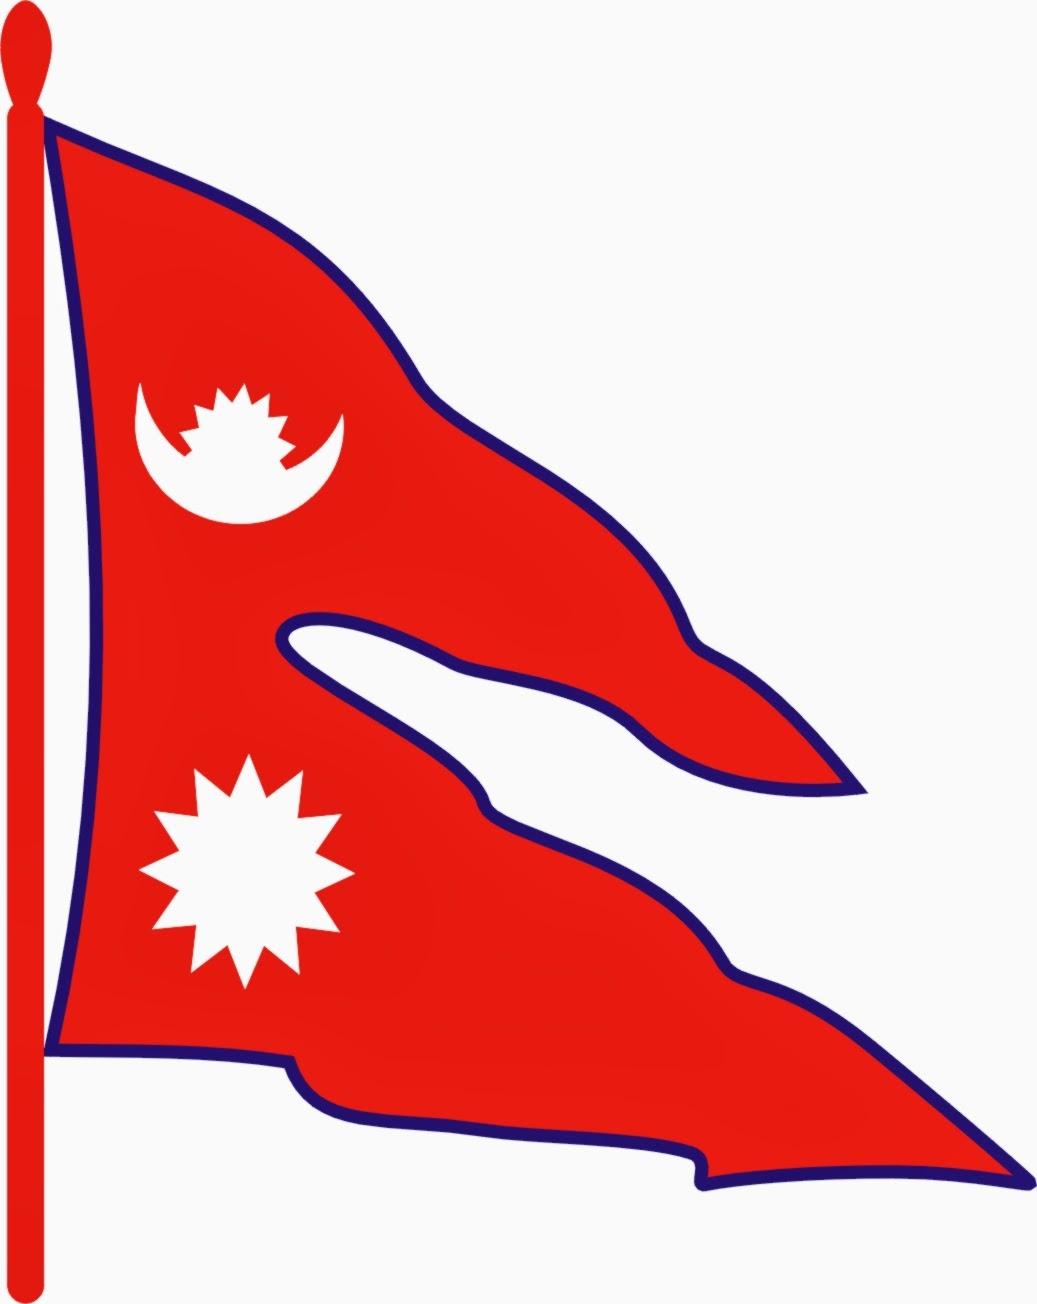 The National Flag of Nepal